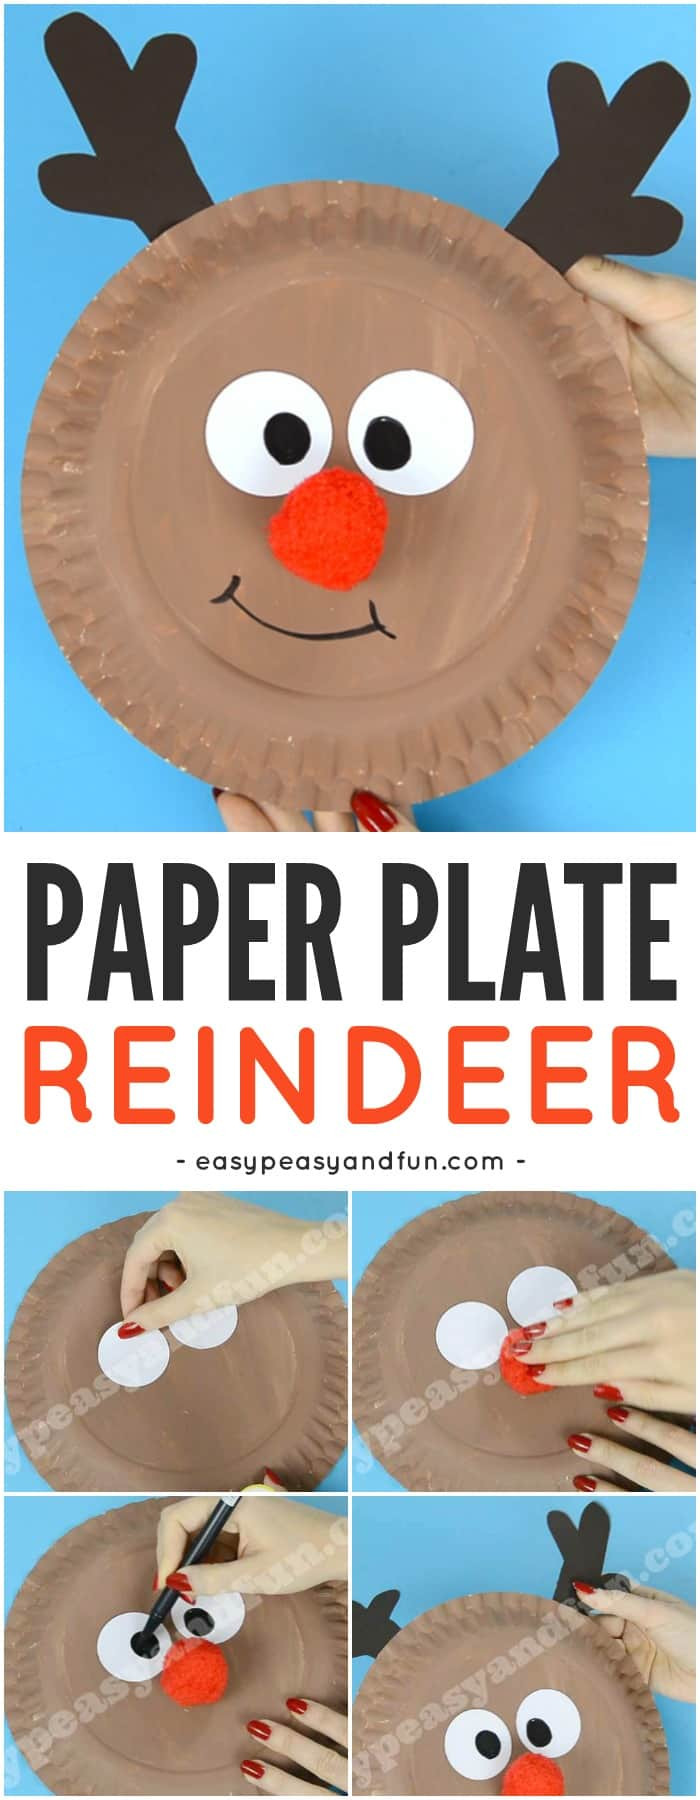 Reindeer Craft For Kids
 Reindeer Paper Plate Craft with a Cute Red Nose Easy